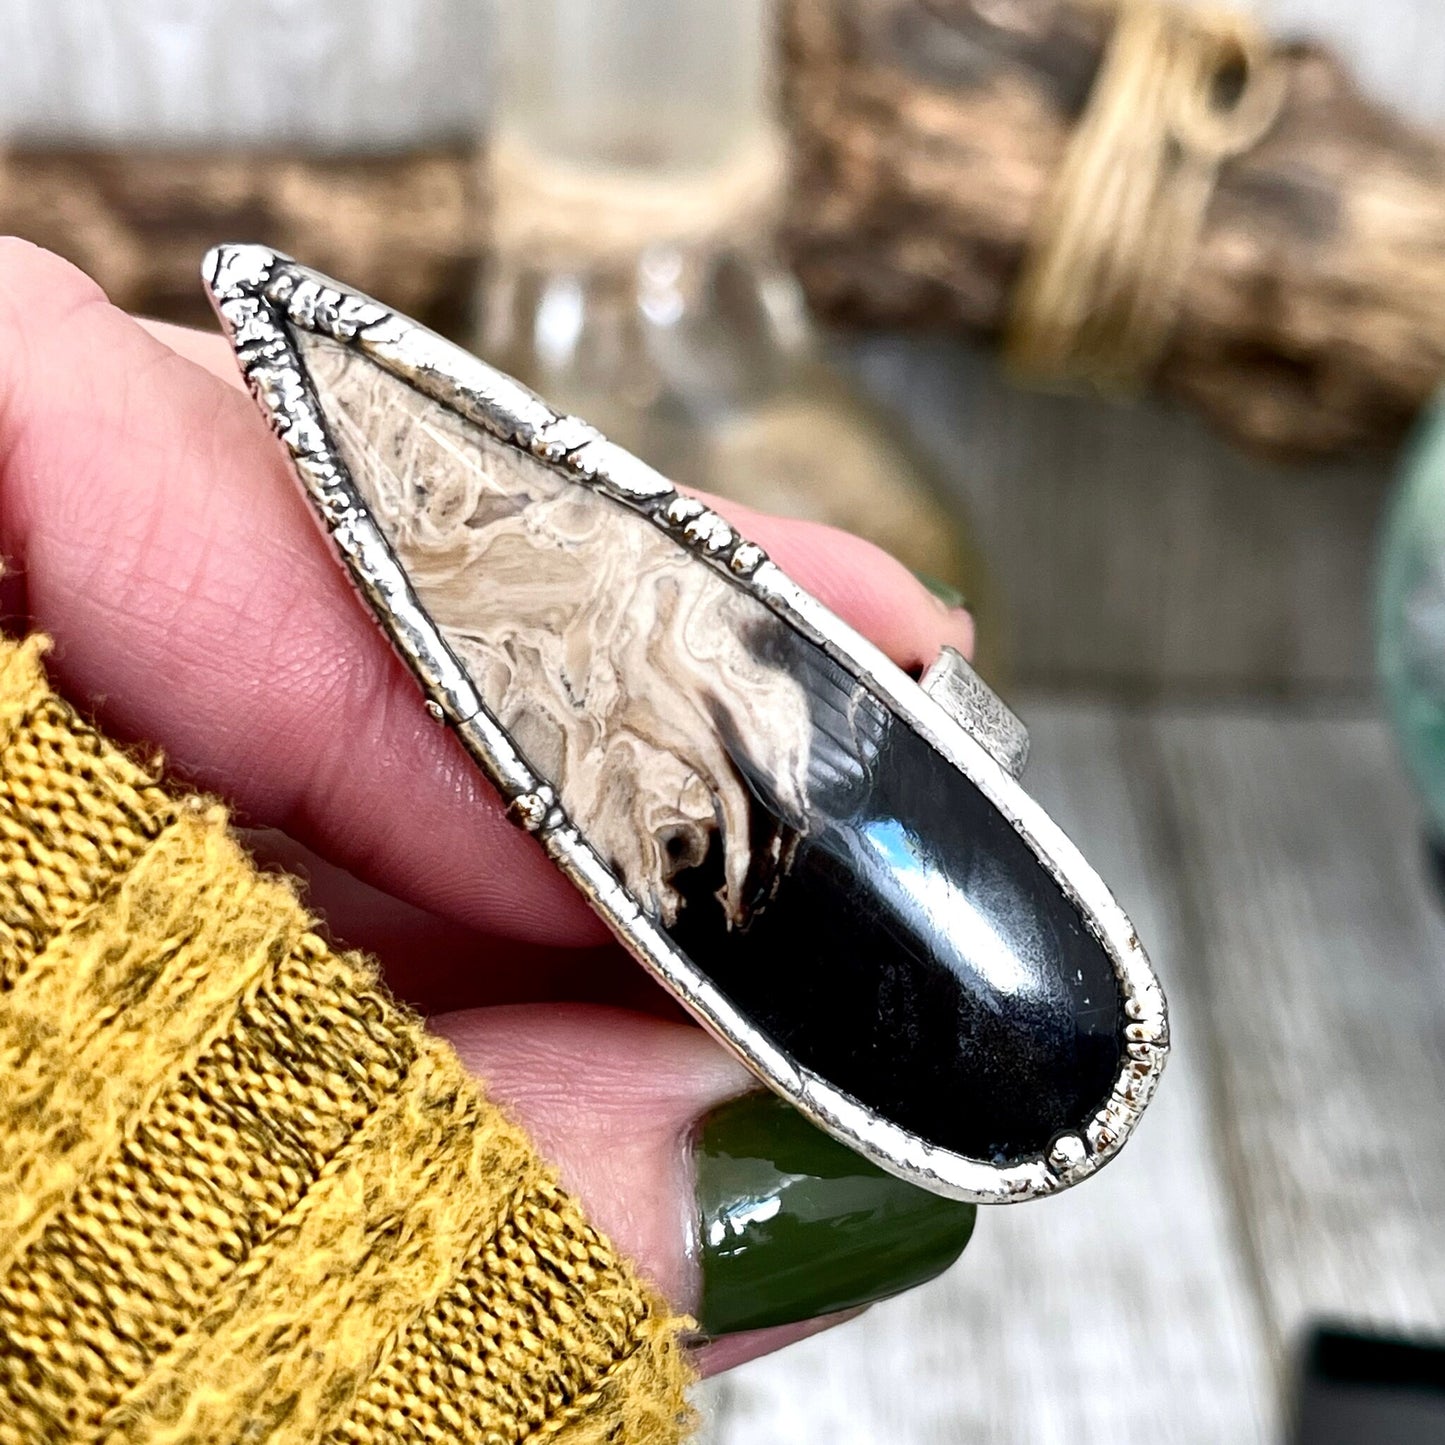 Big Bold Jewelry, Big Crystal Ring, Big Silver Ring, Big Stone Ring, Etsy ID: 1590661153, Fossilized Palm Root, FOXLARK- RINGS, Jewelry, Large Boho Ring, Large Crystal Ring, Large Stone Ring, Natural stone ring, Rings, silver crystal ring, Silver Stone Je